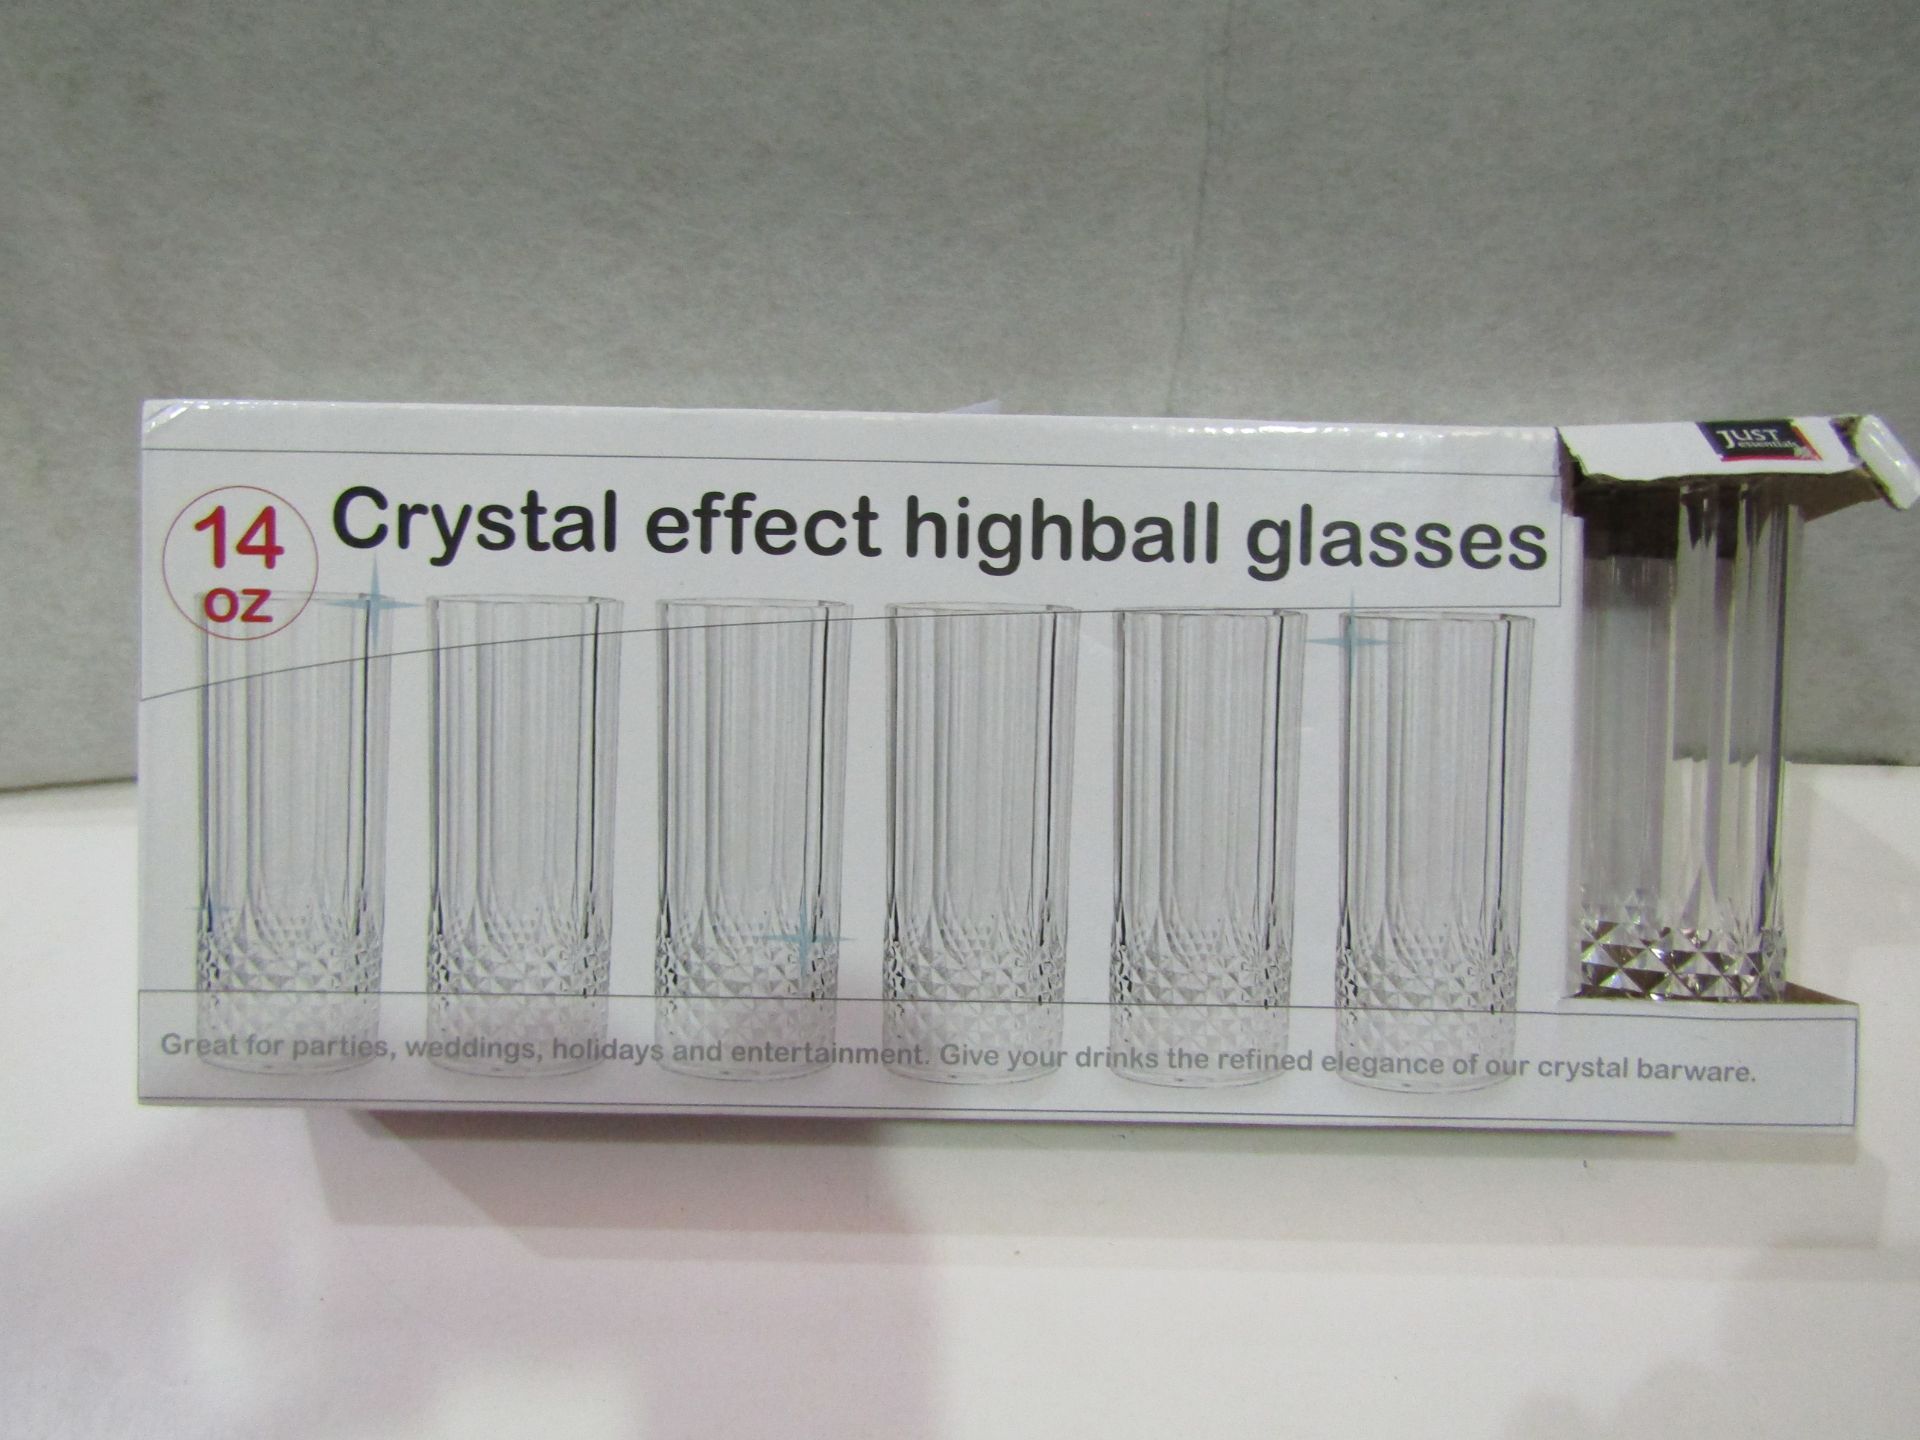 Just Choice - Set of 6 Crystal Effect Highball Glasses - Boxed.